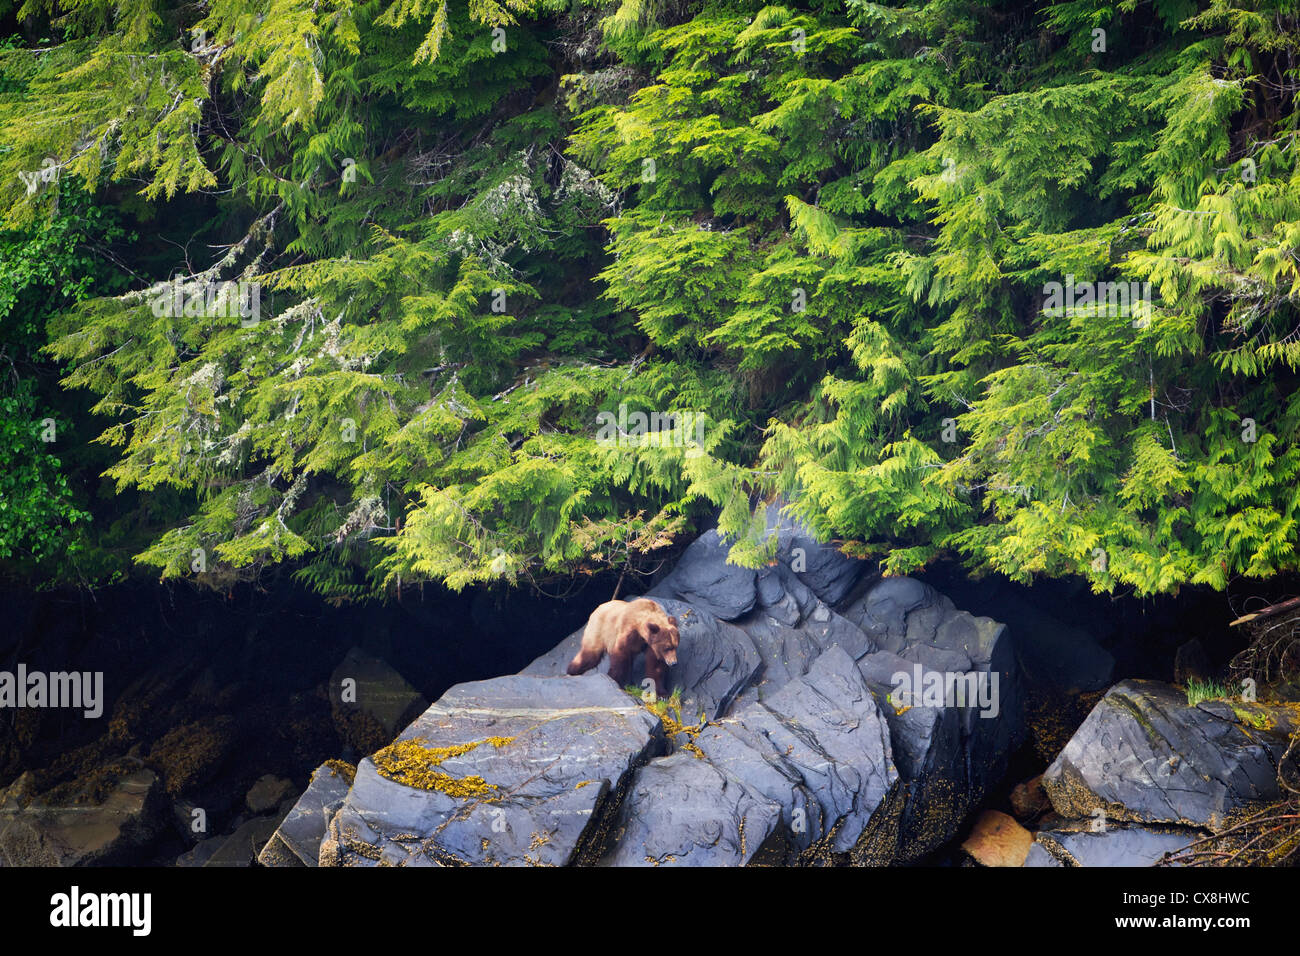 Grizzly bear emerges from the forest at the khutzeymateen grizzly bear sanctuary near prince rupert;British columbia canada Stock Photo